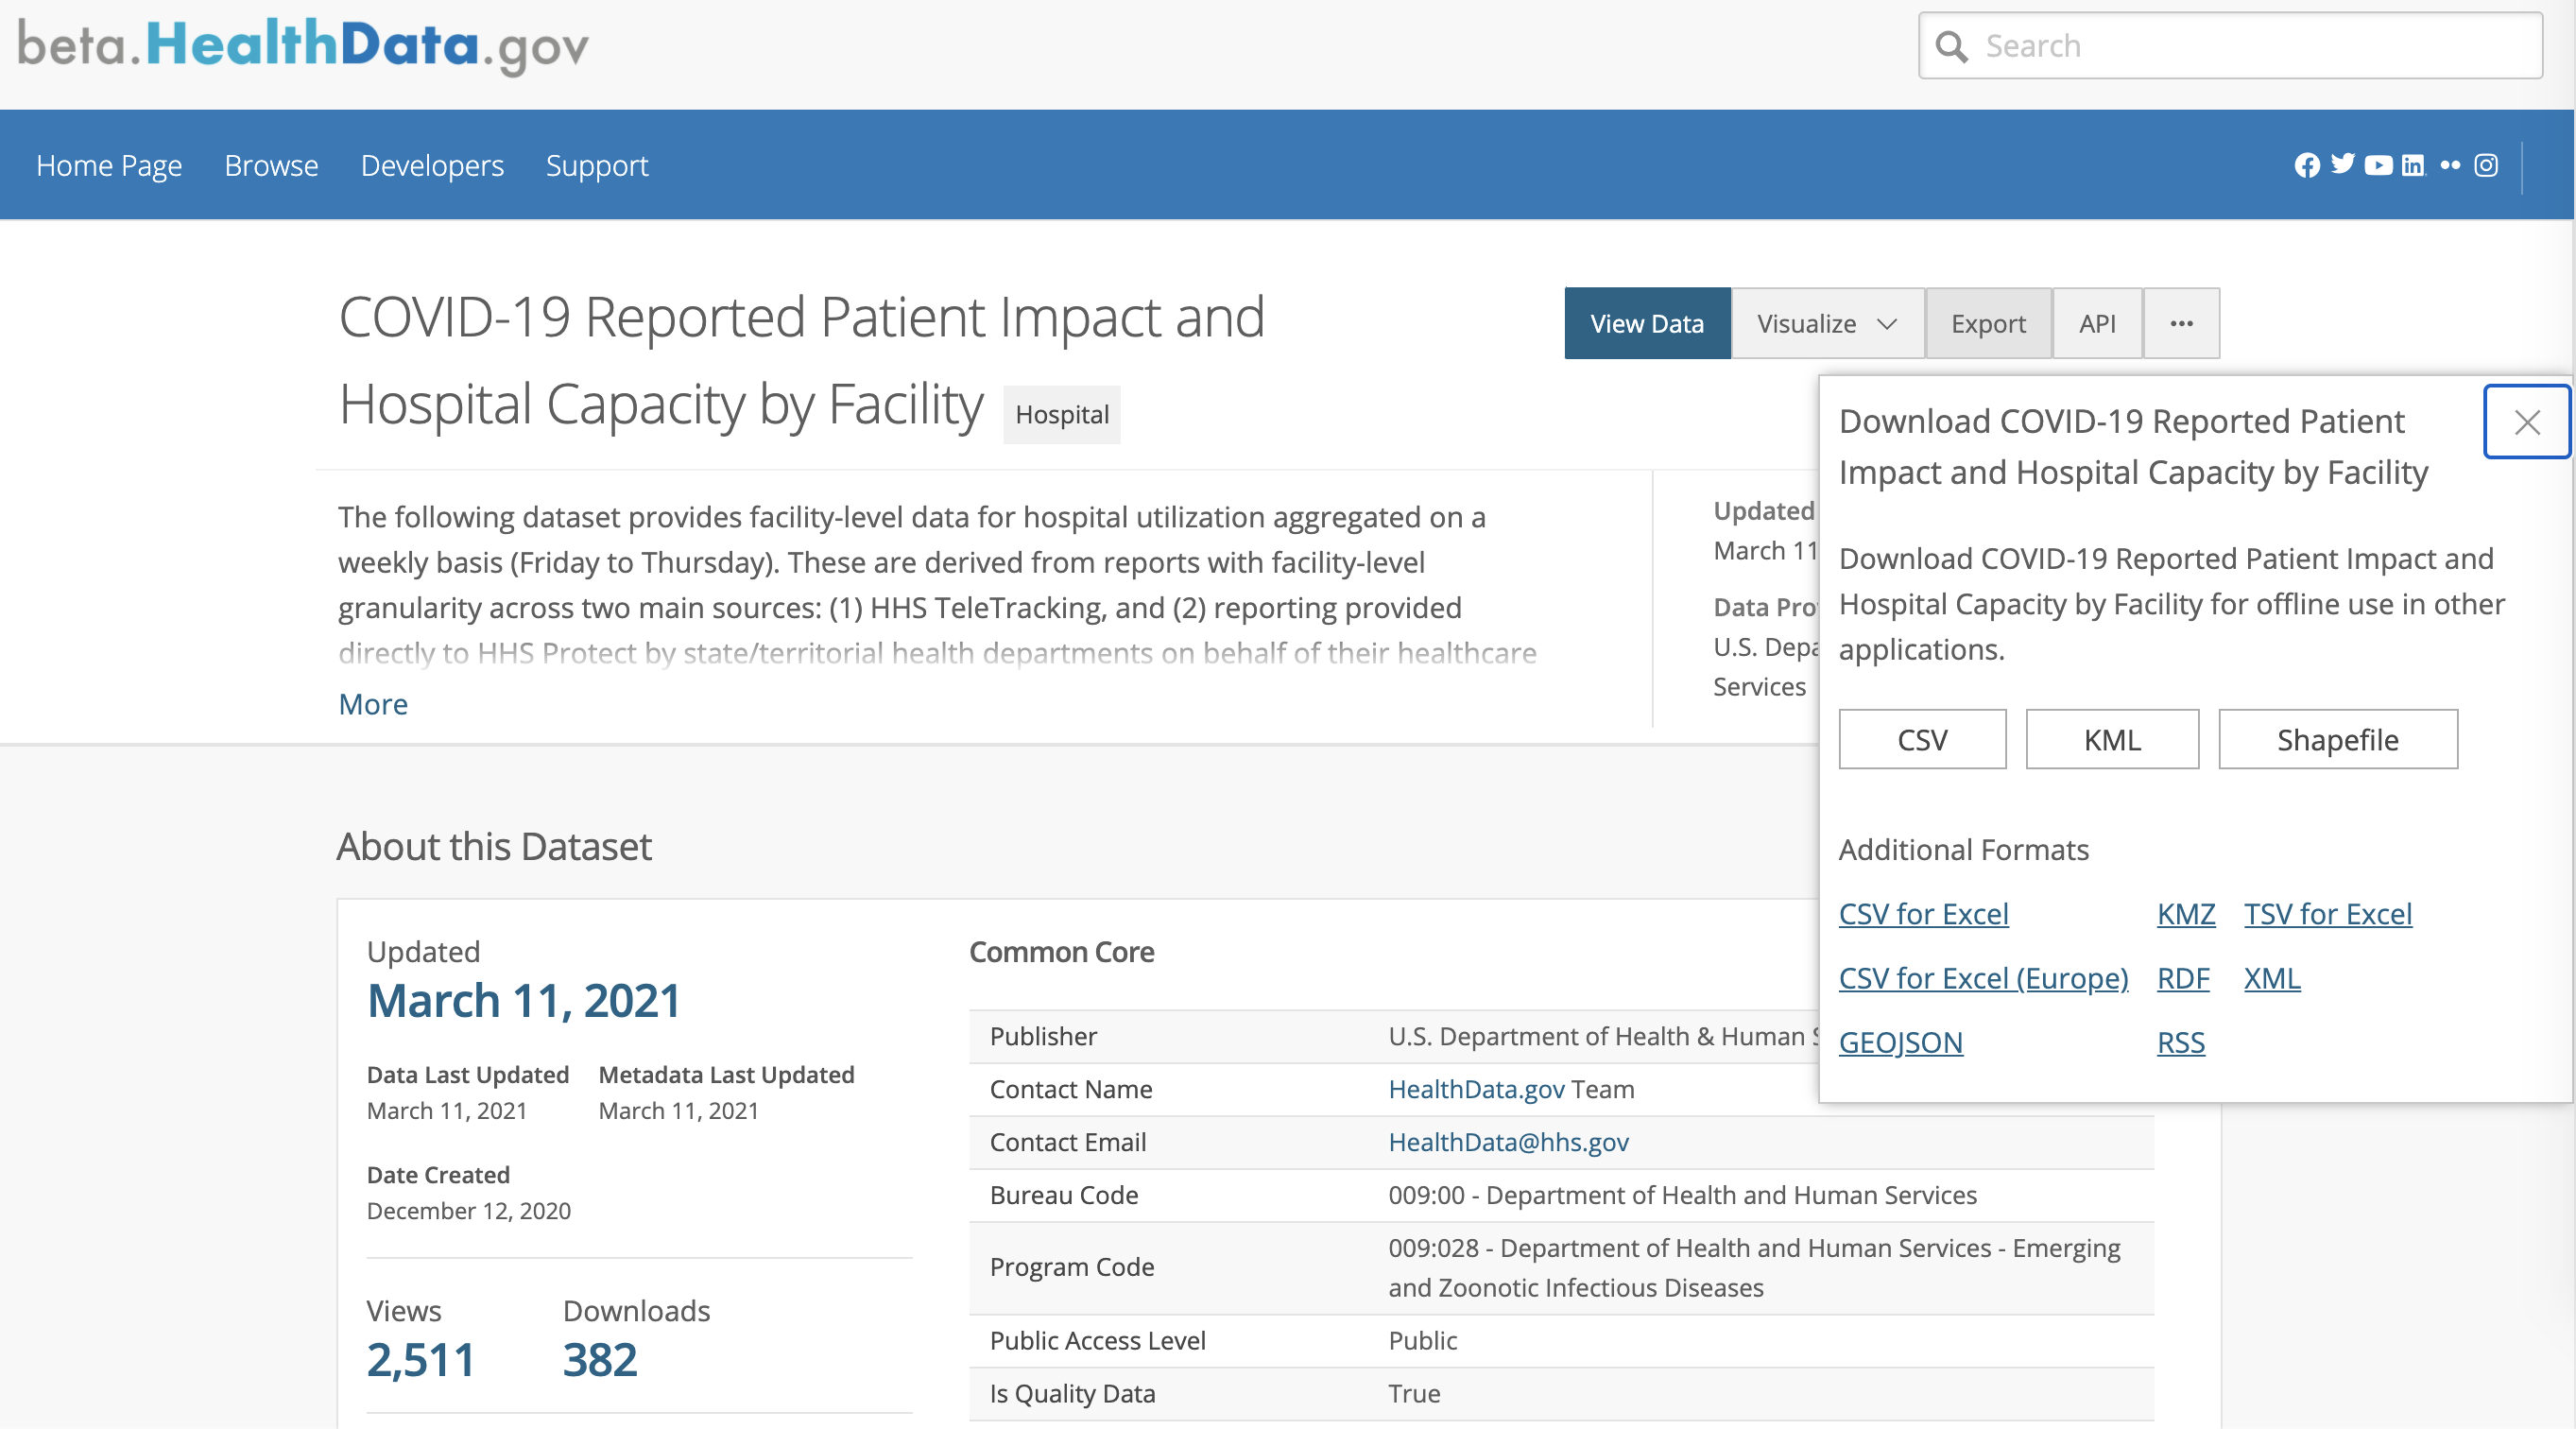 Screenshot of the HHS facility-level hospitalization dataset hosting page at https://beta.healthdata.gov/Hospital/COVID-19-Reported-Patient-Impact-and-Hospital-Capa/anag-cw7u